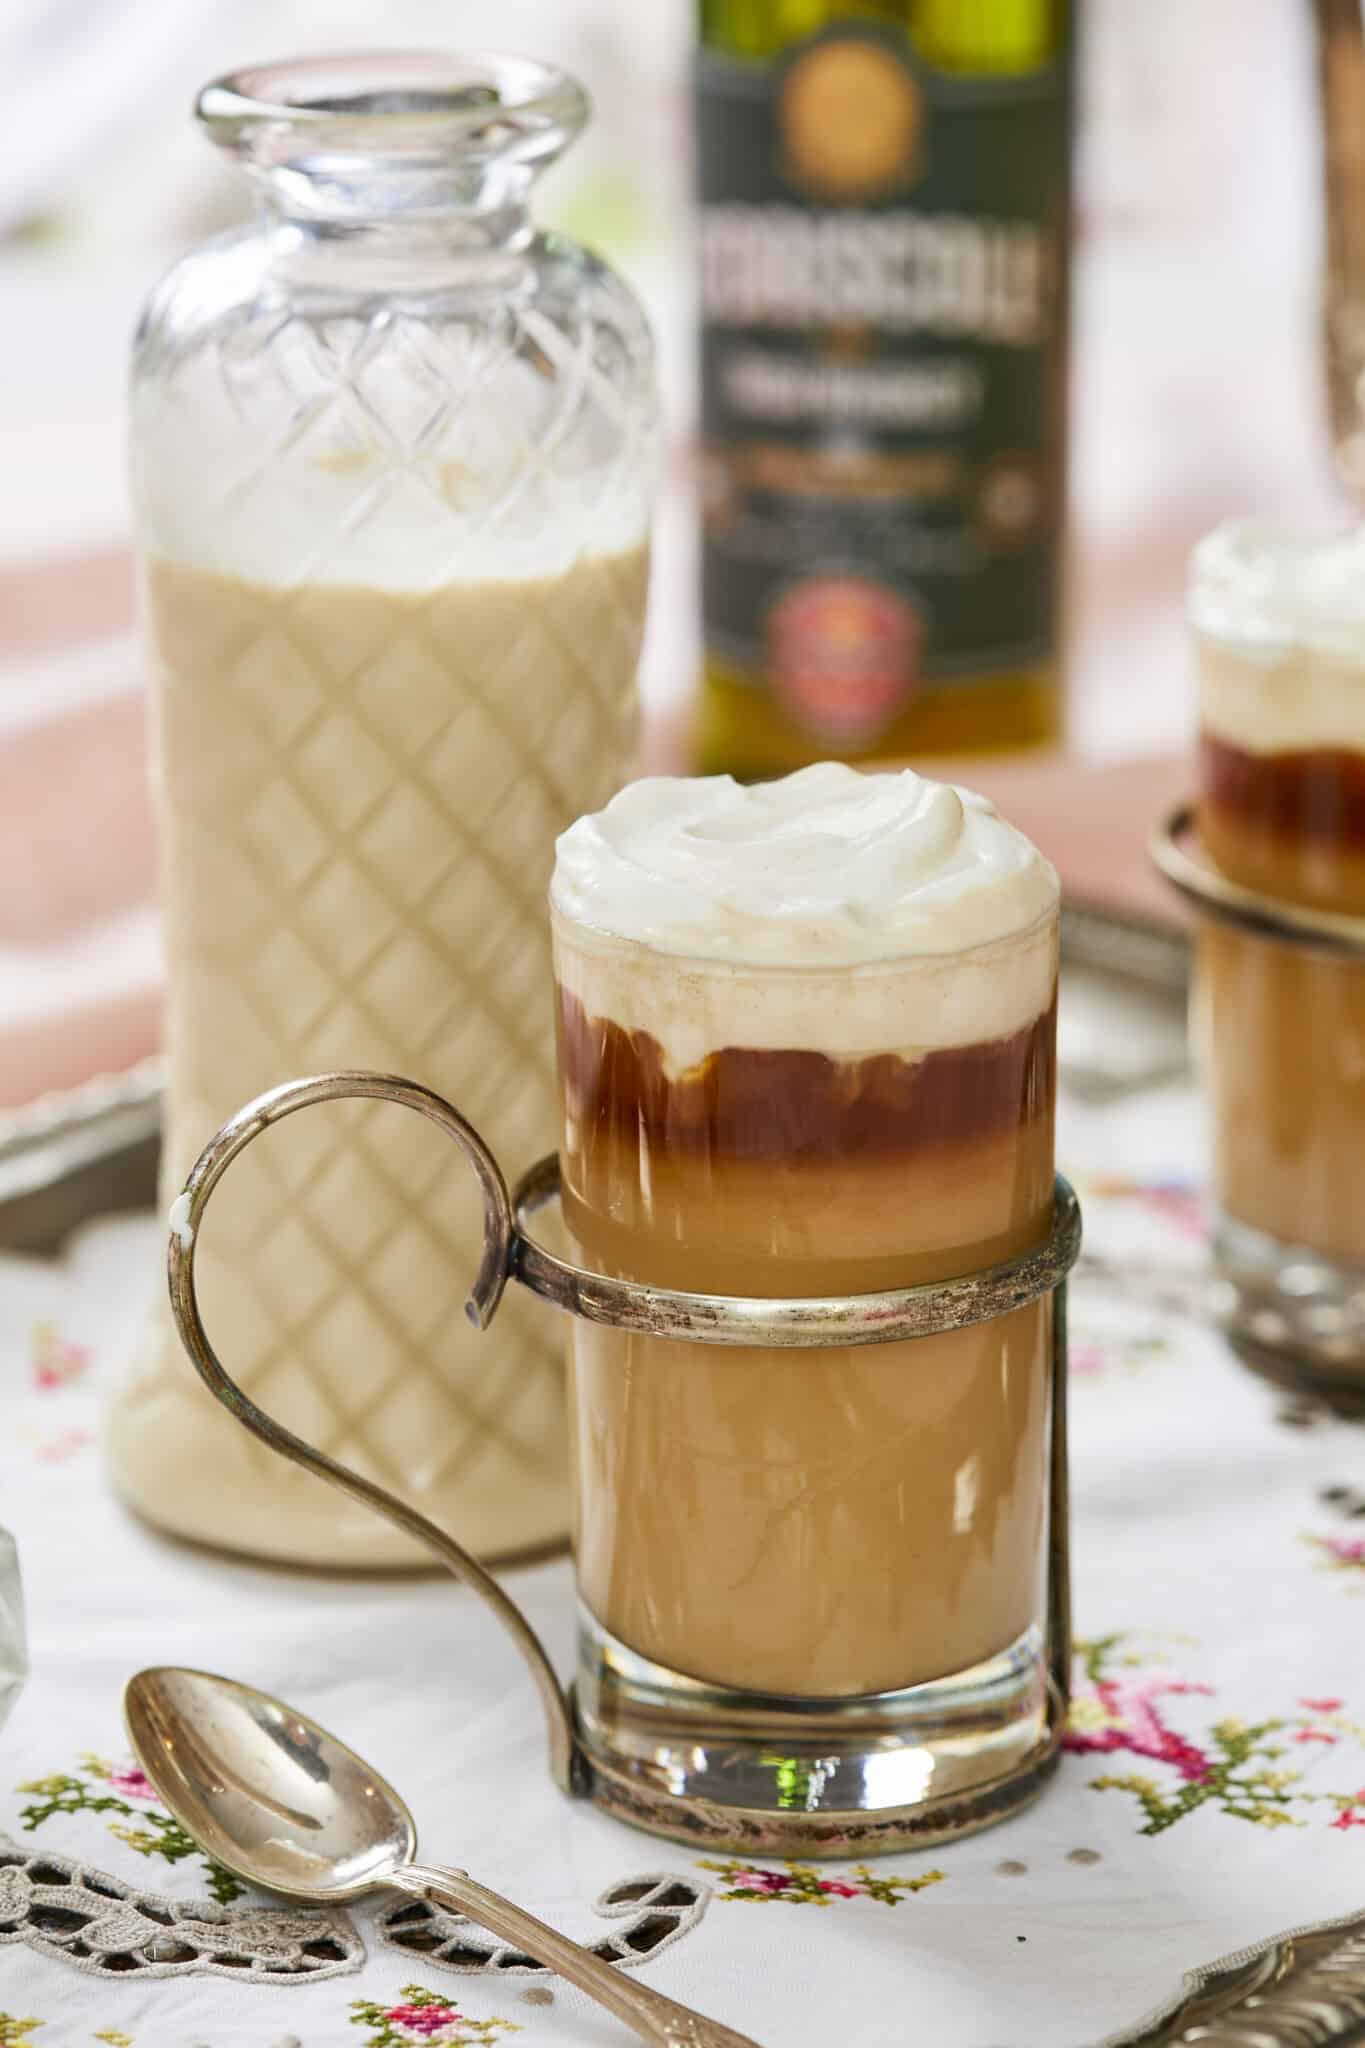 Silky smooth Homemade Irish Cream is in stored in a tall weave pattern glass bottle. In front of the bottle is a glass of Irish Cream Frappuccino which has layered blended sweet, floral, nutty and boozy Irish Cream with coffee and milk at the bottom, topped with pillowy whipped cream. A silver spoon is next to the glass. A bottle of O'Driscoll's whiskey and a second glass of frap are in the background. 